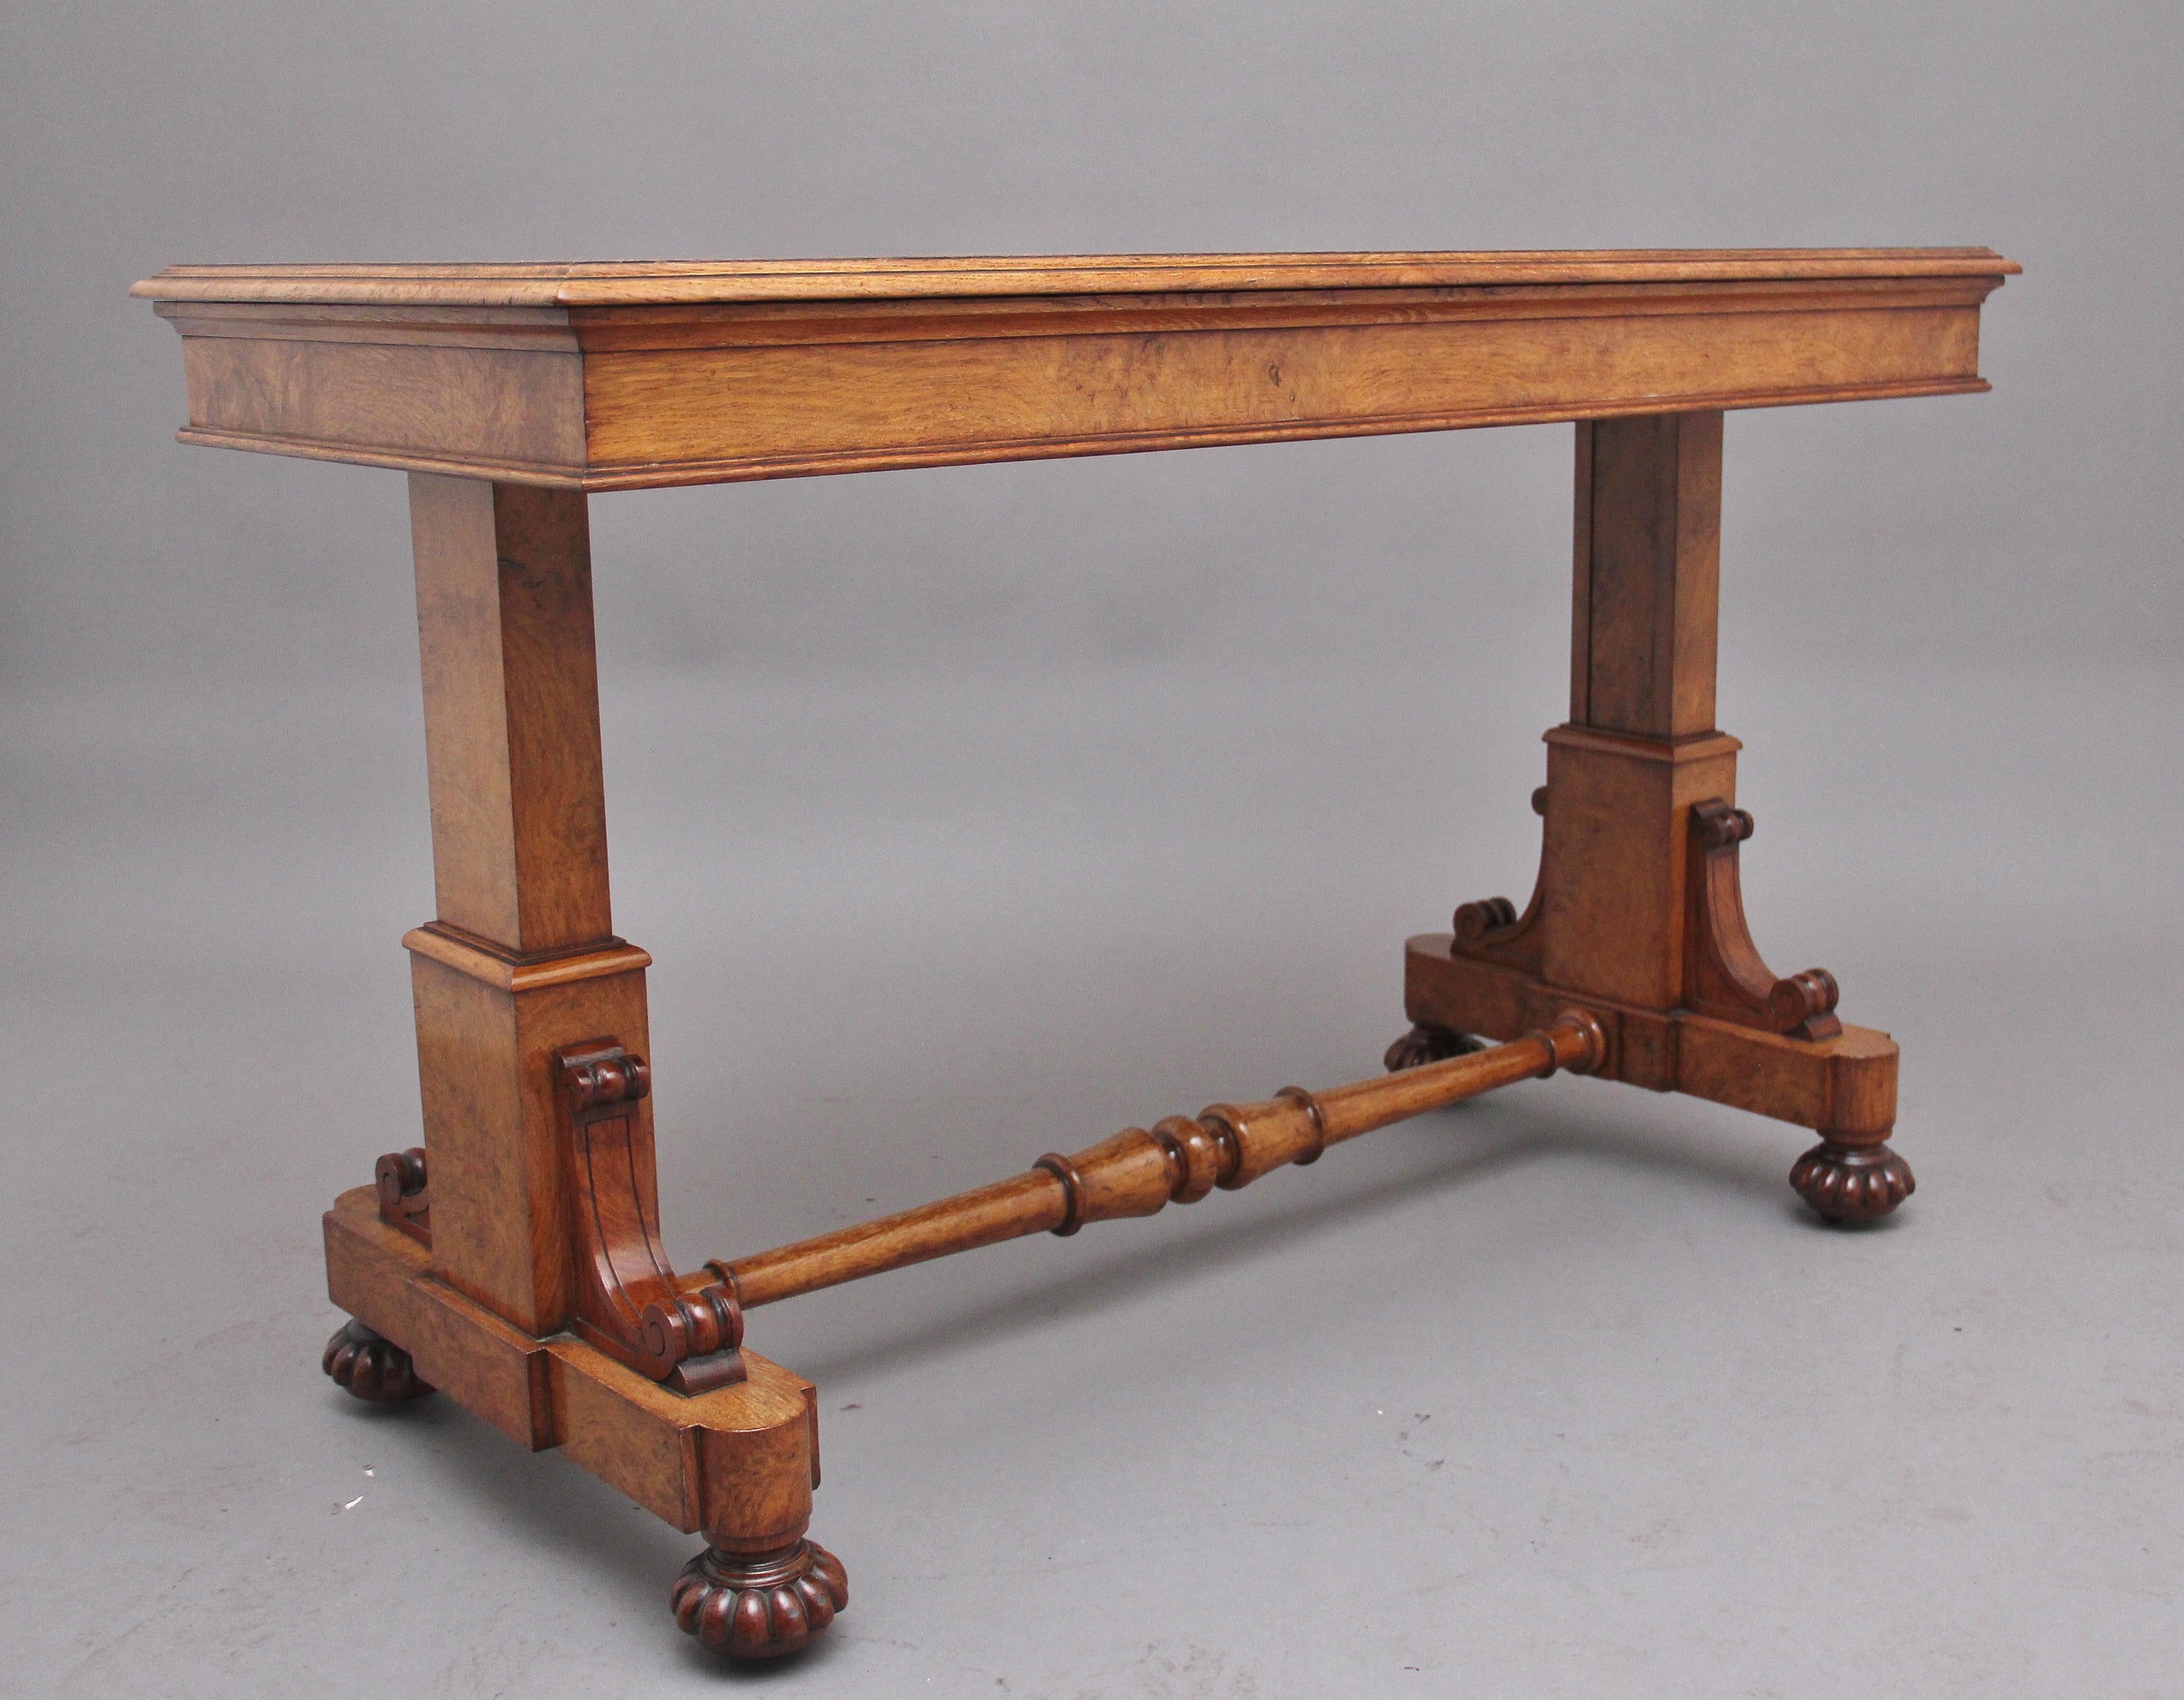 A superb quality early 19th Century pollard oak buffet / dumb waiter, having a lovely figured top with a moulded edge supported on two end supports decorated with carved corner brackets, standing on carved turned feet united by a turned stretcher.